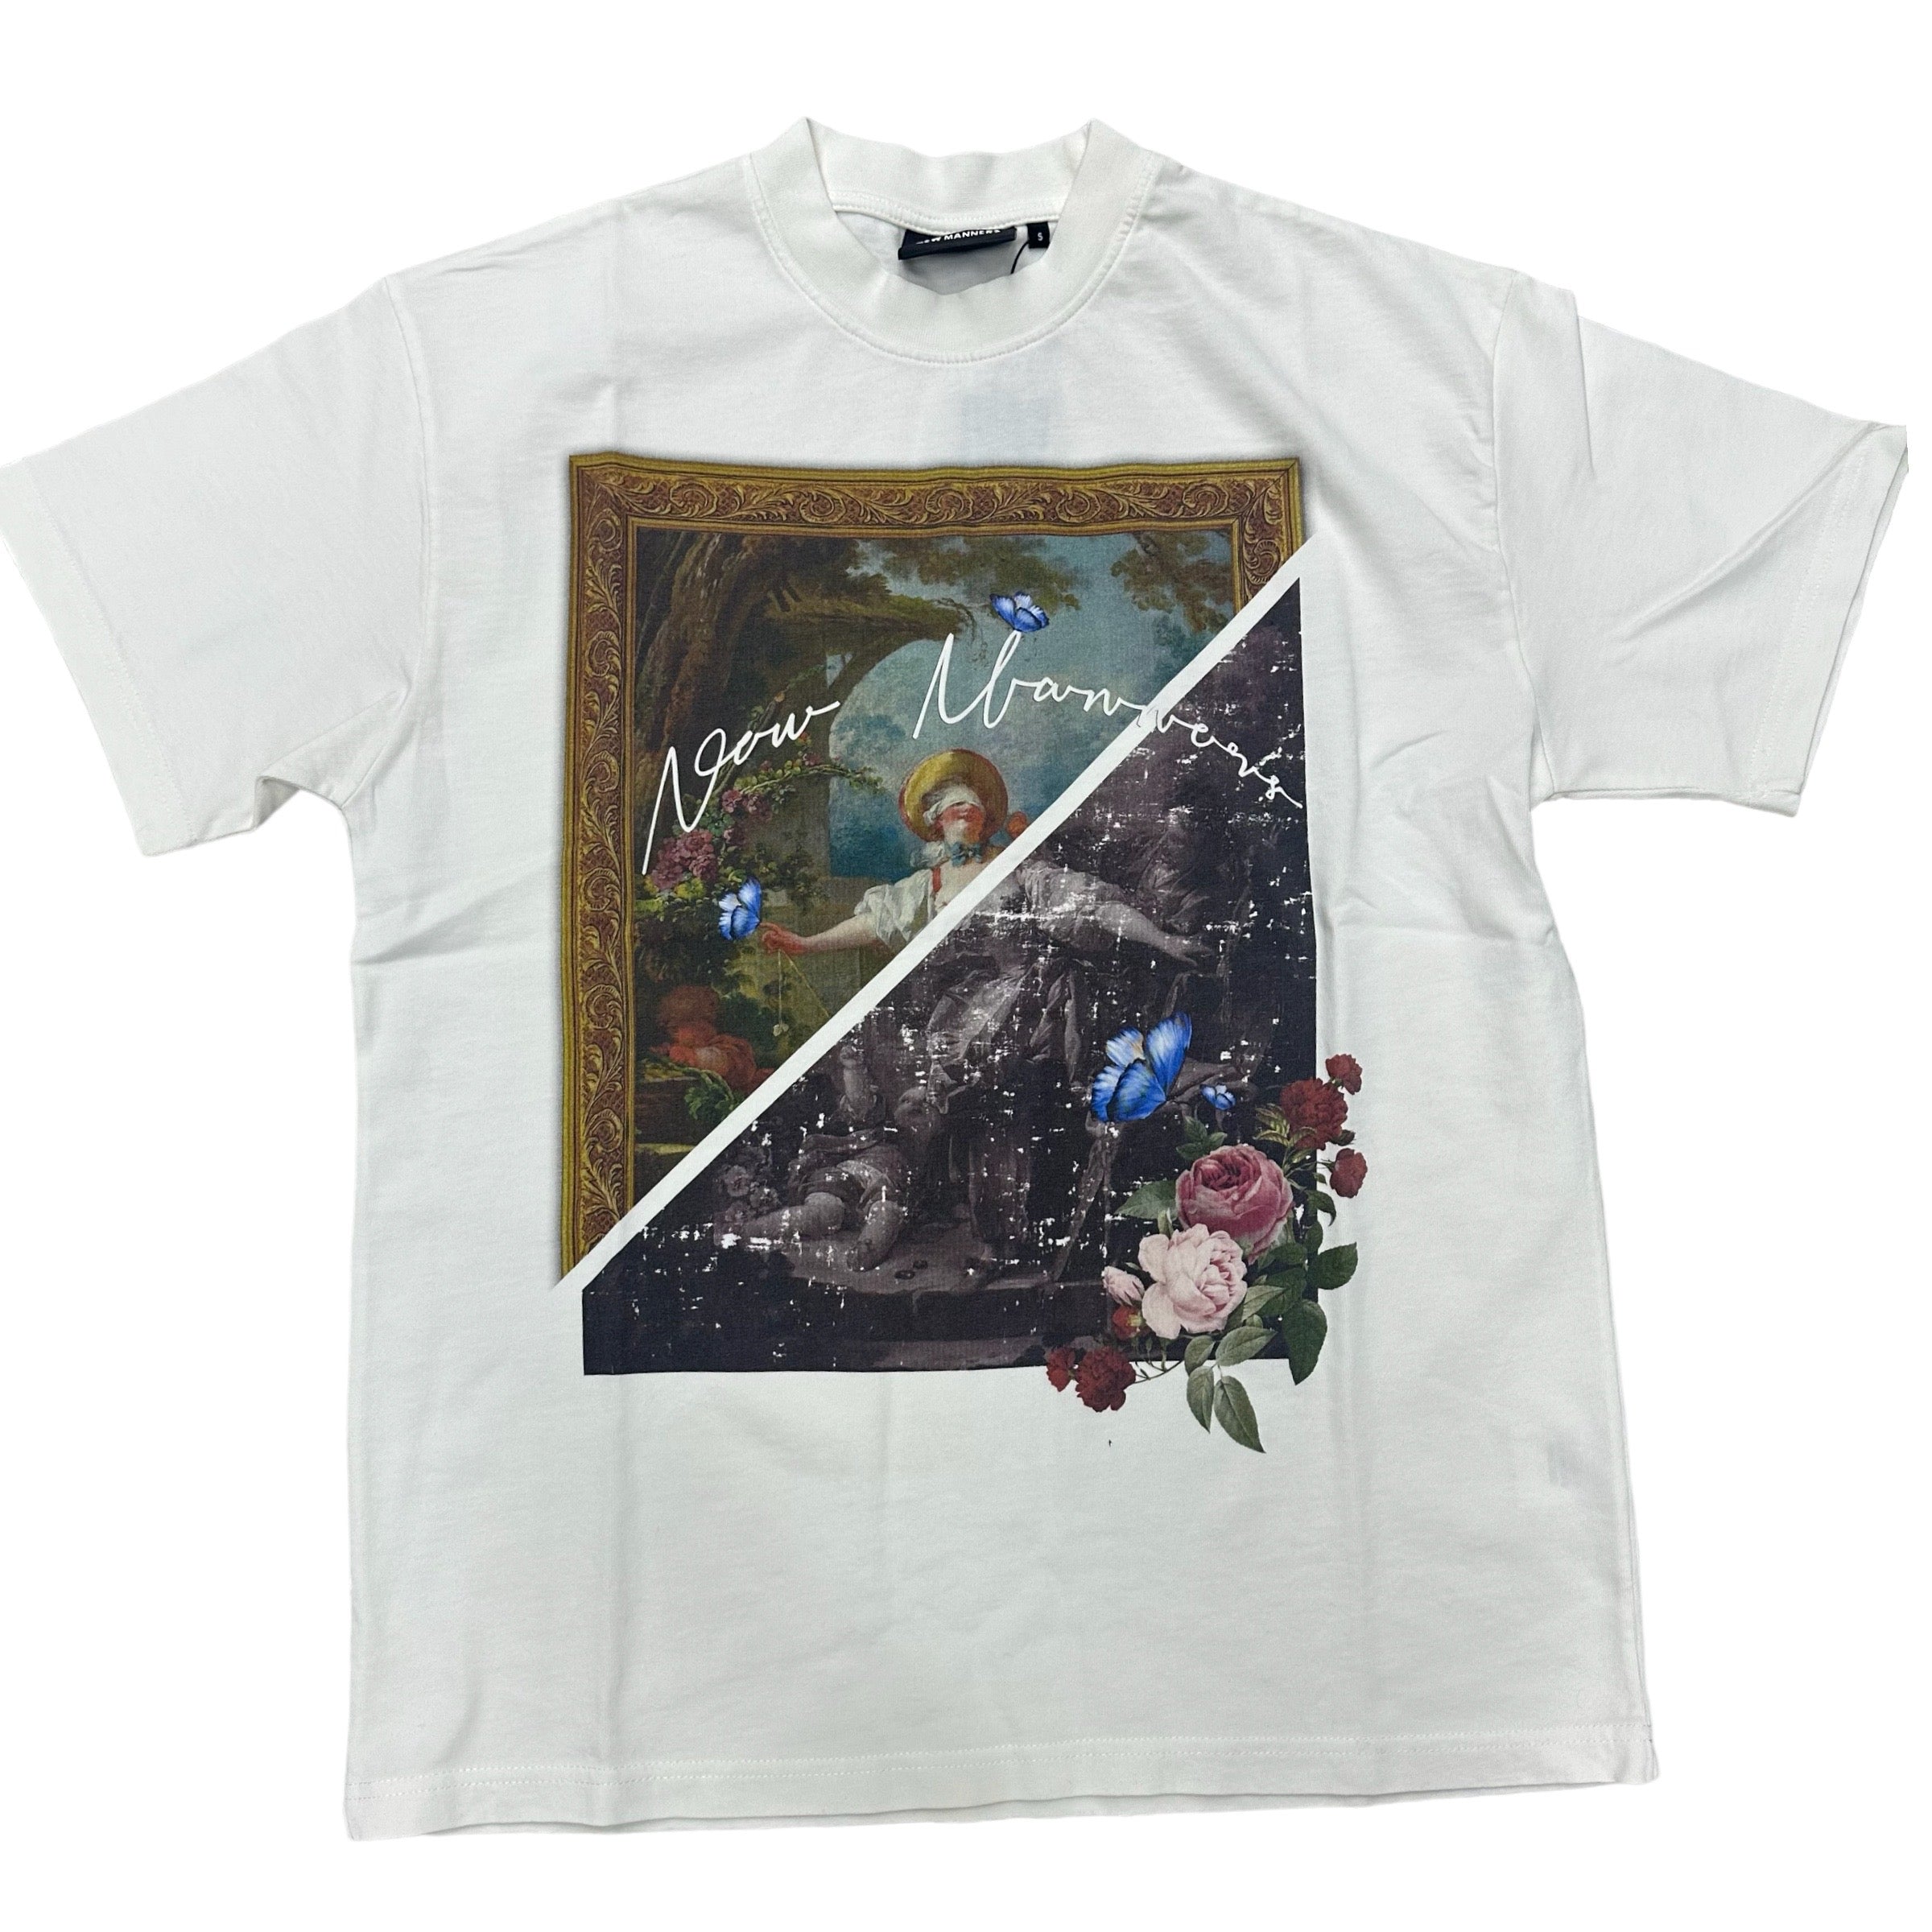 Manners OverSize Spring T-shirt White